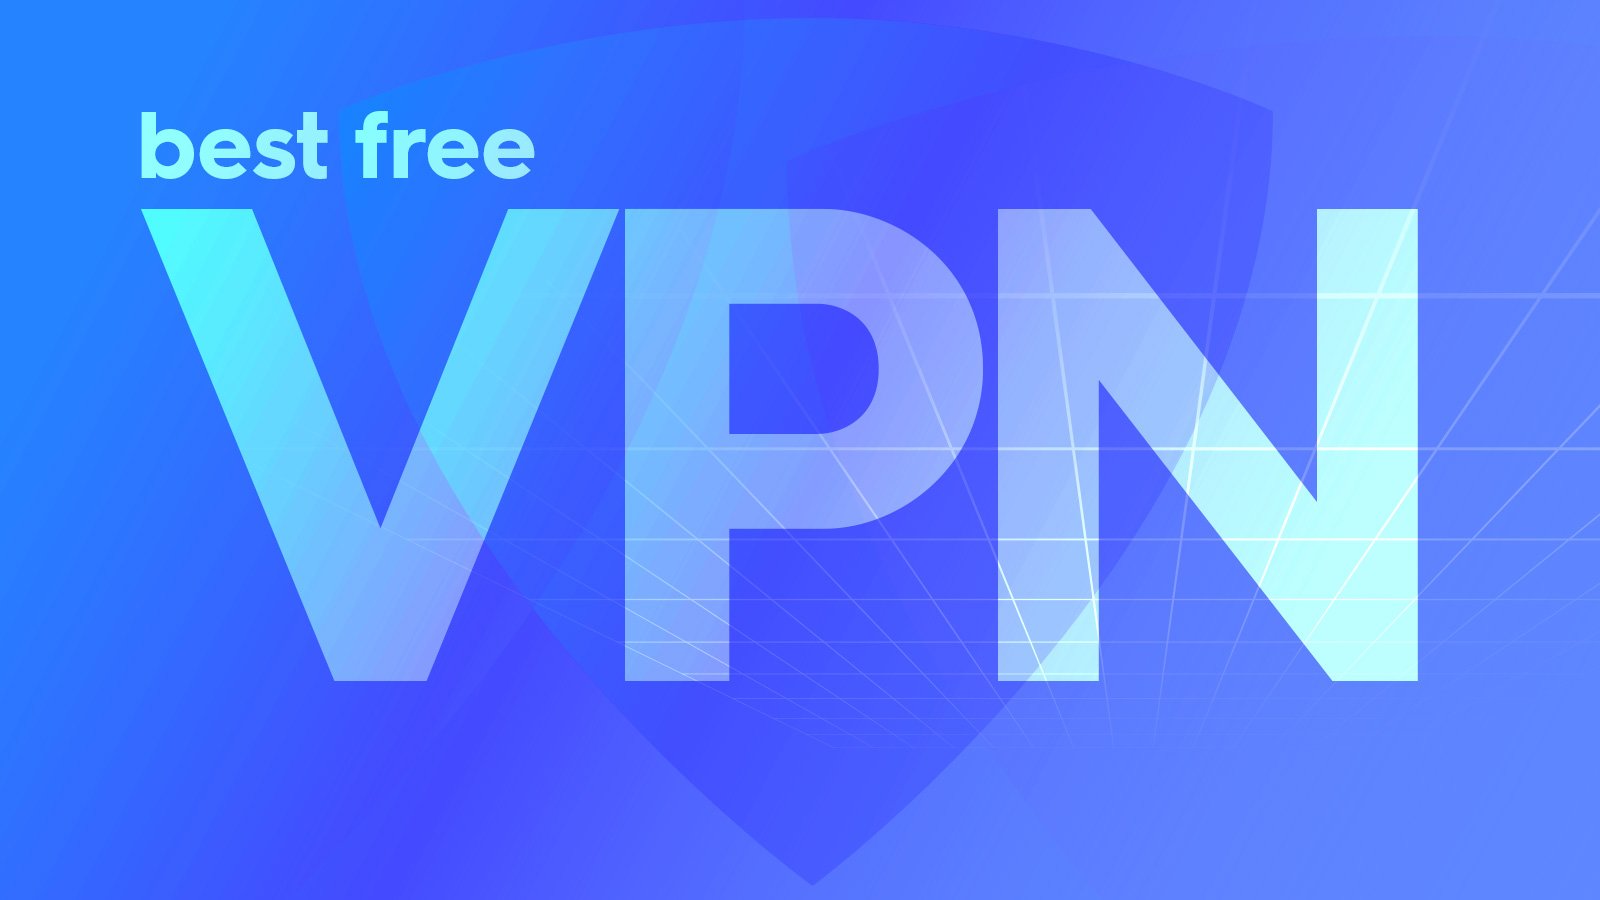 8 Best (REALLY FREE) VPNs in 2021 - Safe, Fast, and Unlimited